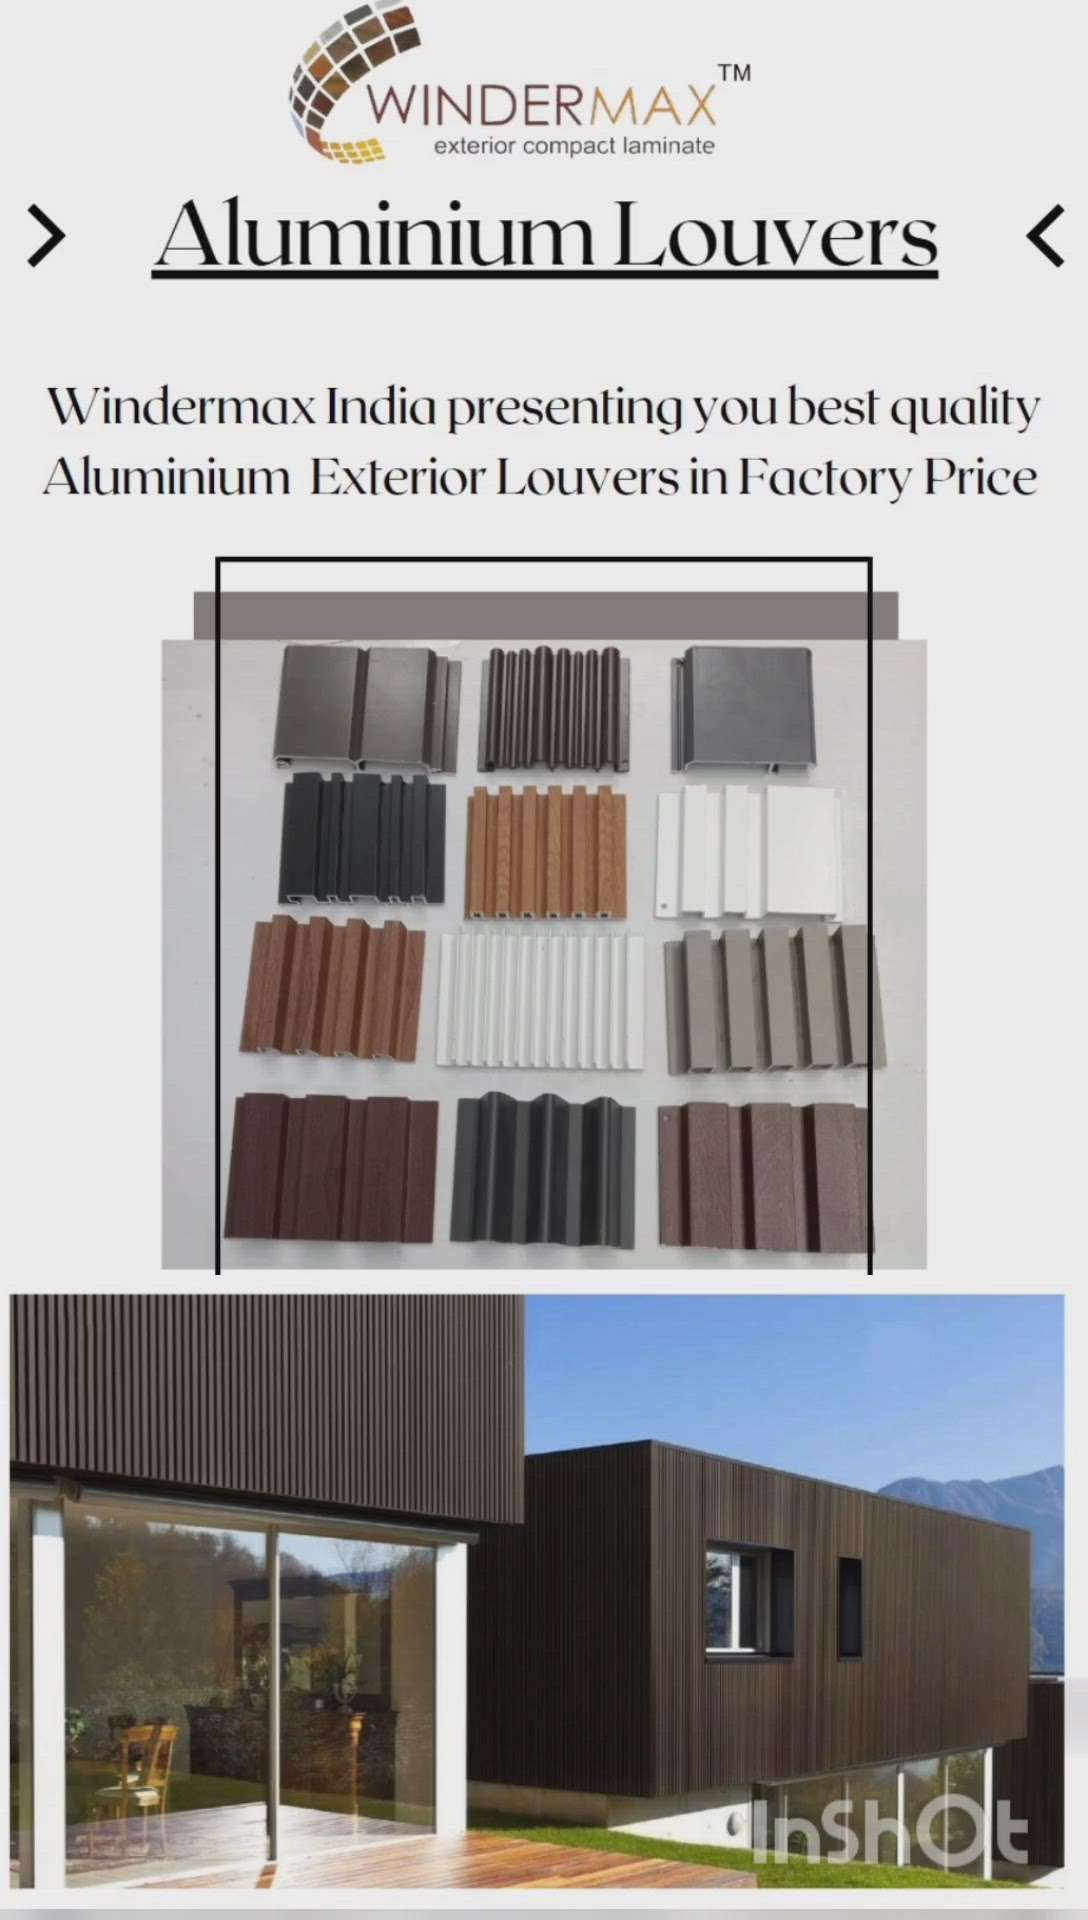 Aluminum louvers
at just 270 per sqft
. 
.
Get a classic look for your exterior
.
. 
#aluminium #aluminium louvers #exterior #exteriorelevation #elevation #modernexterior #exteriordesigner #louvers #modernelevation 
. 
. 
Stay connected for more information
. 
. 
www.windermaxindia.com
info@windermaxindia.com
Or call us on 9810980278, 9810980636